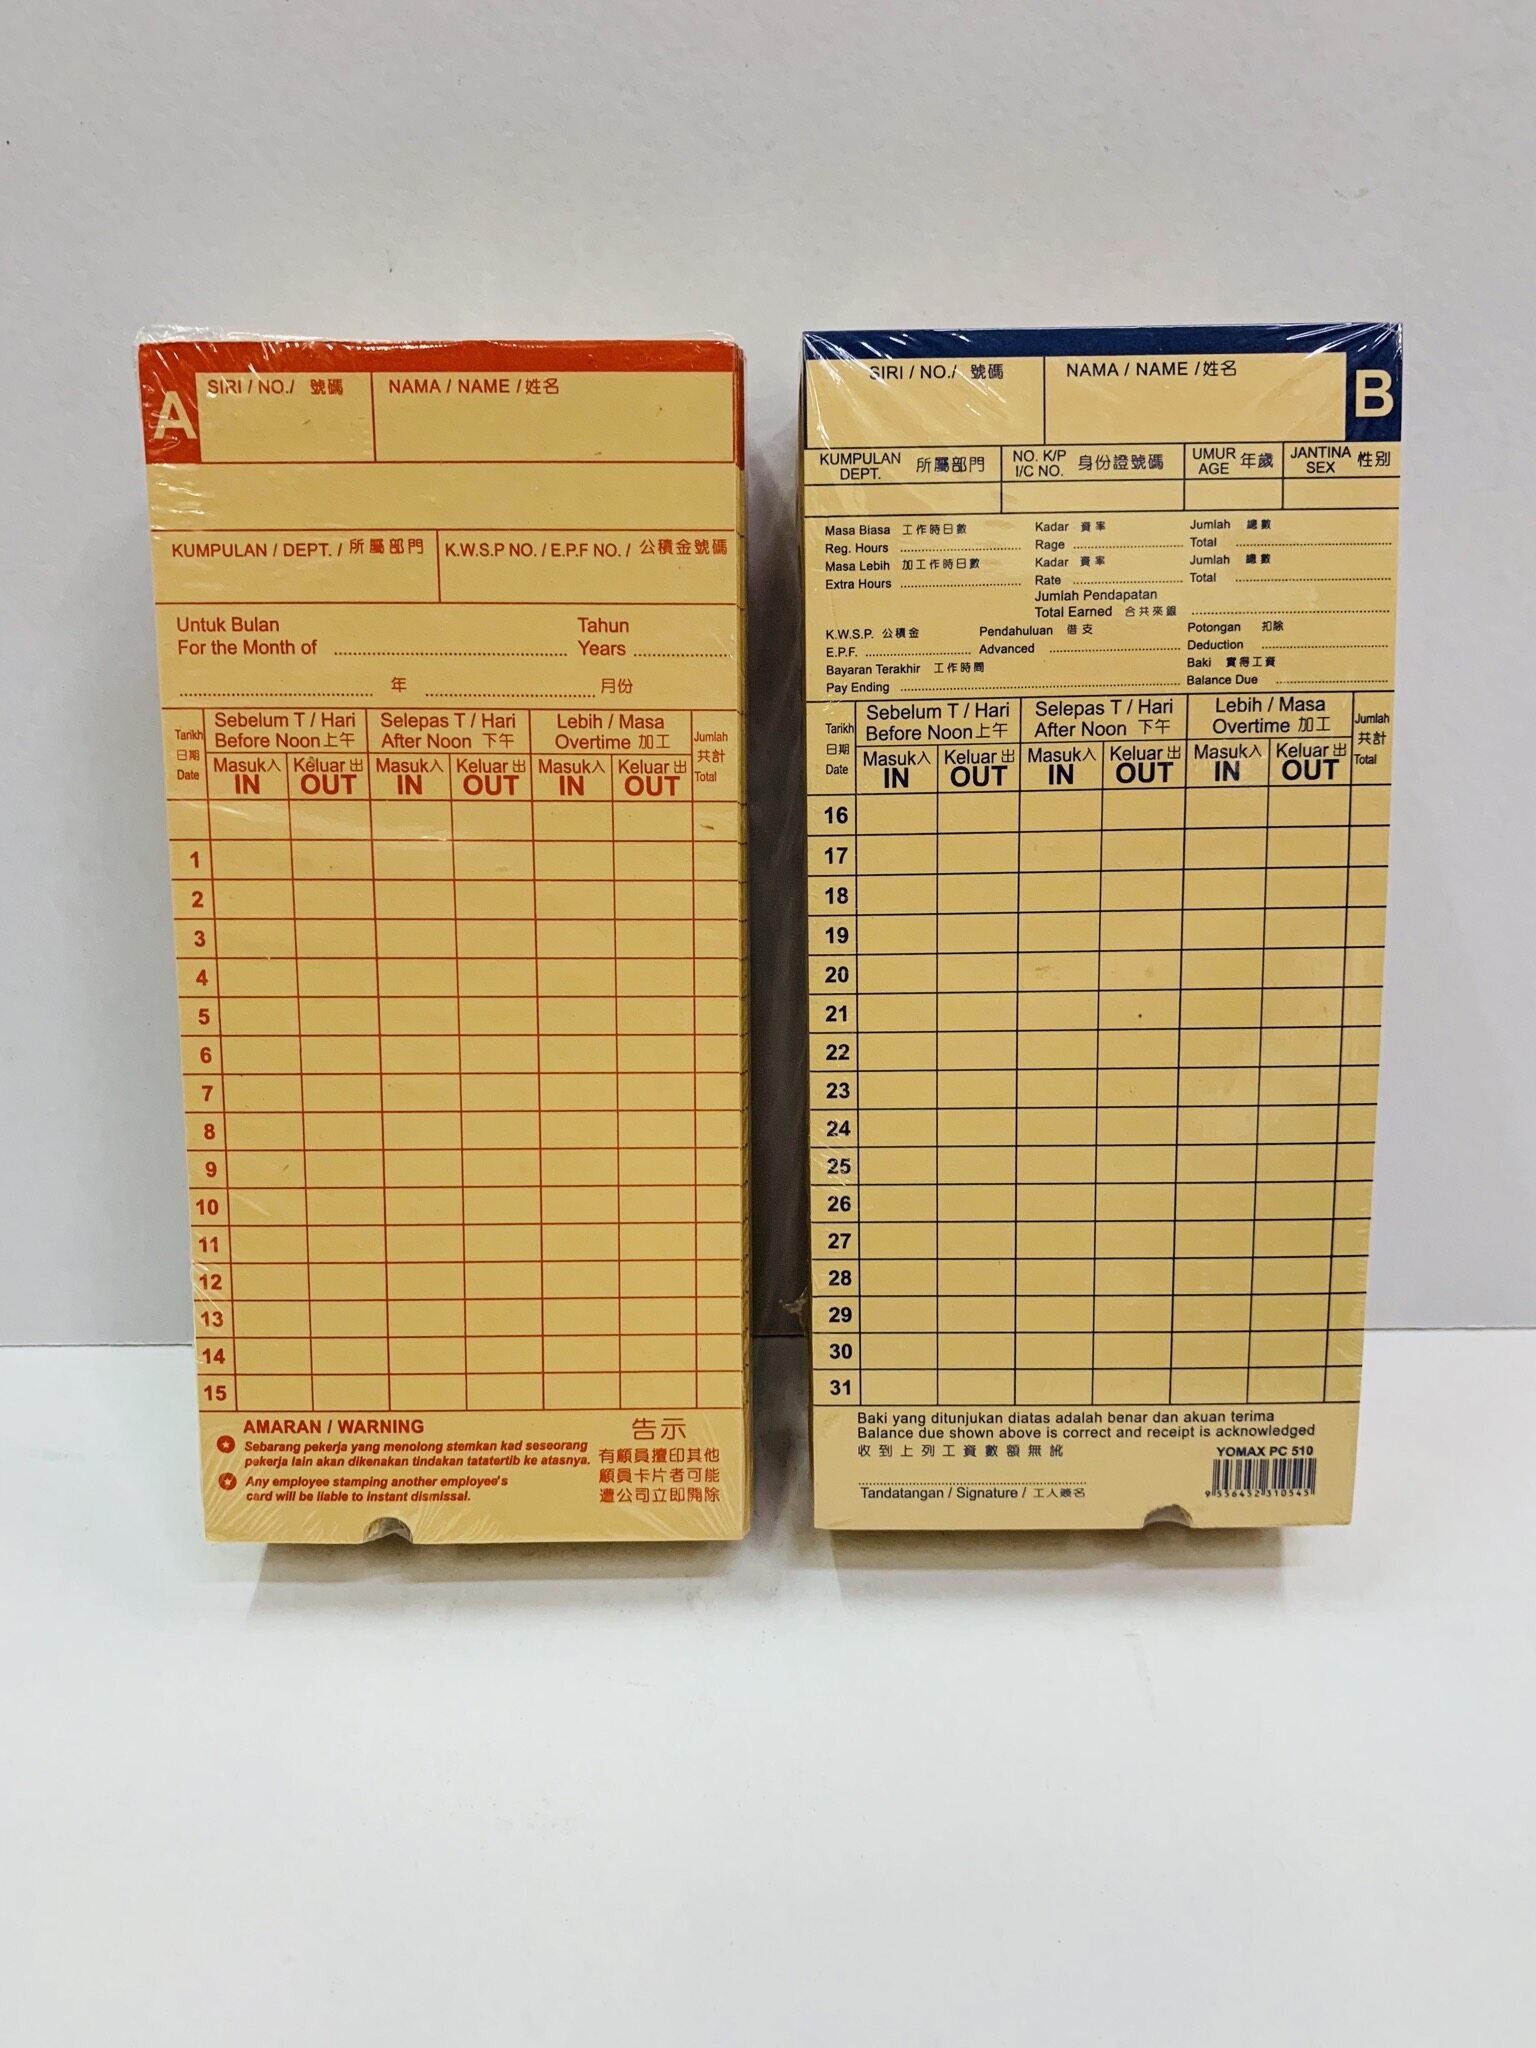 Punch Card In Malay - This was the first tool that used informatics to